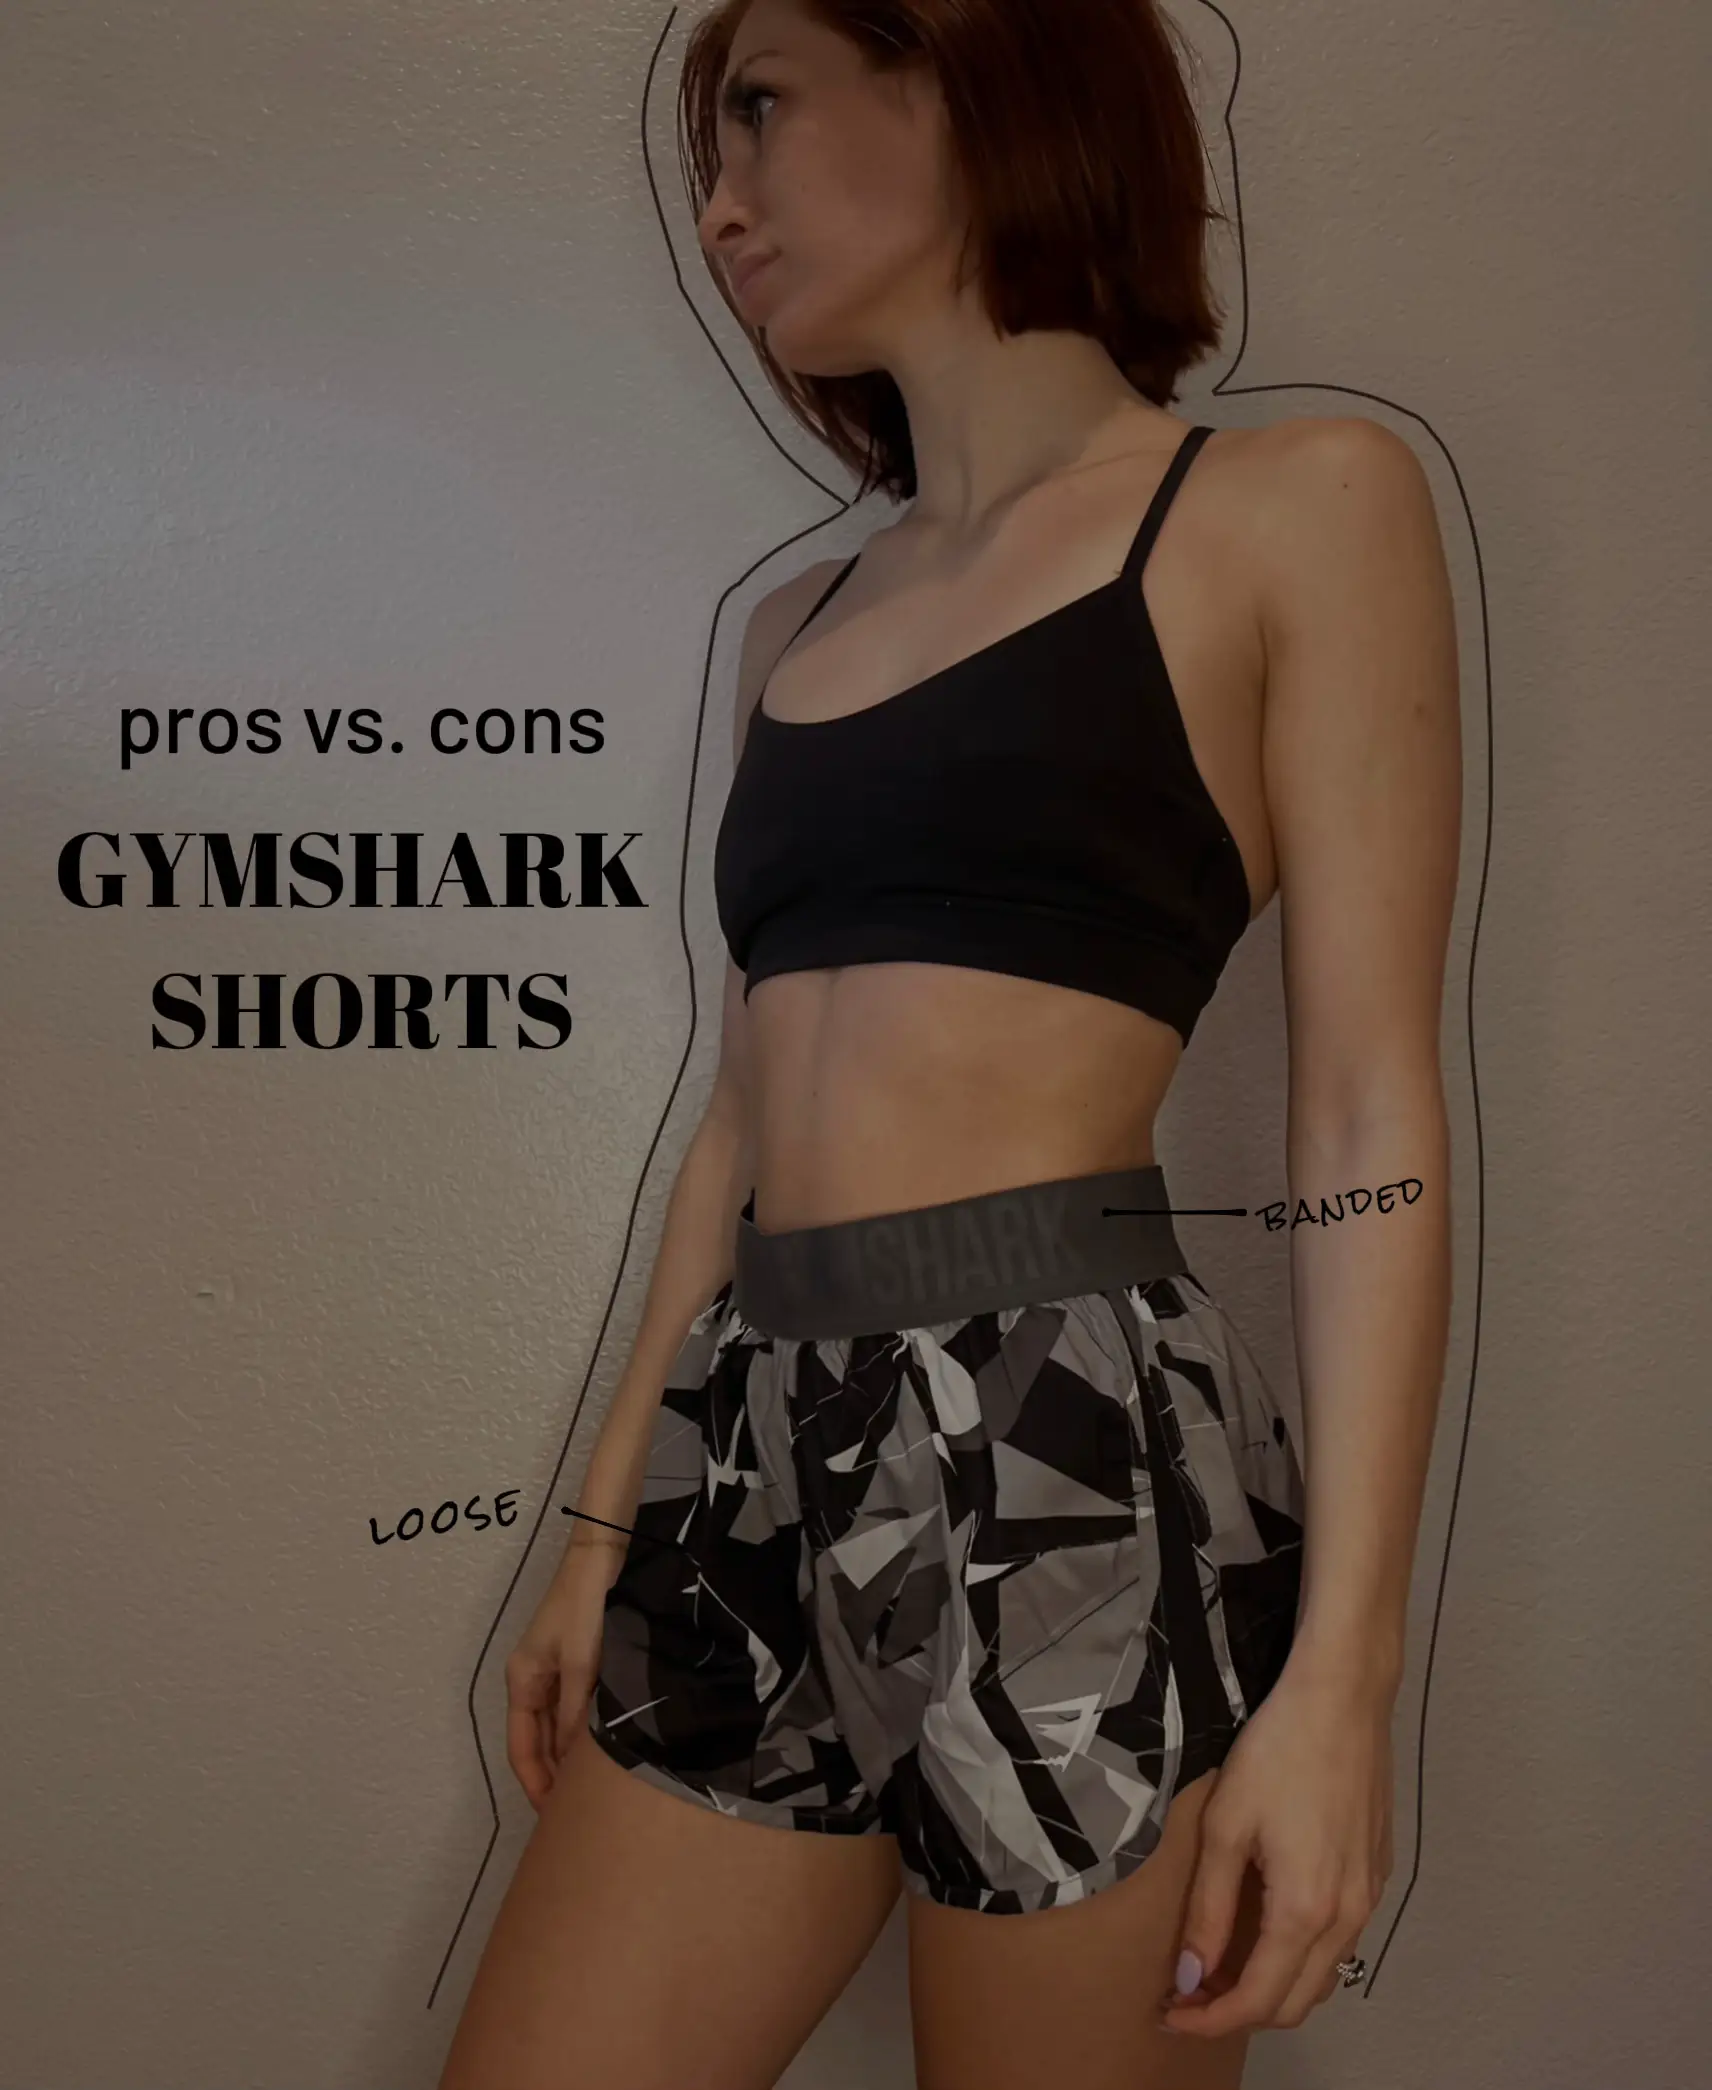 Gymshark Vital Seamless 2.0 shorts, size small - $28 - From Mary